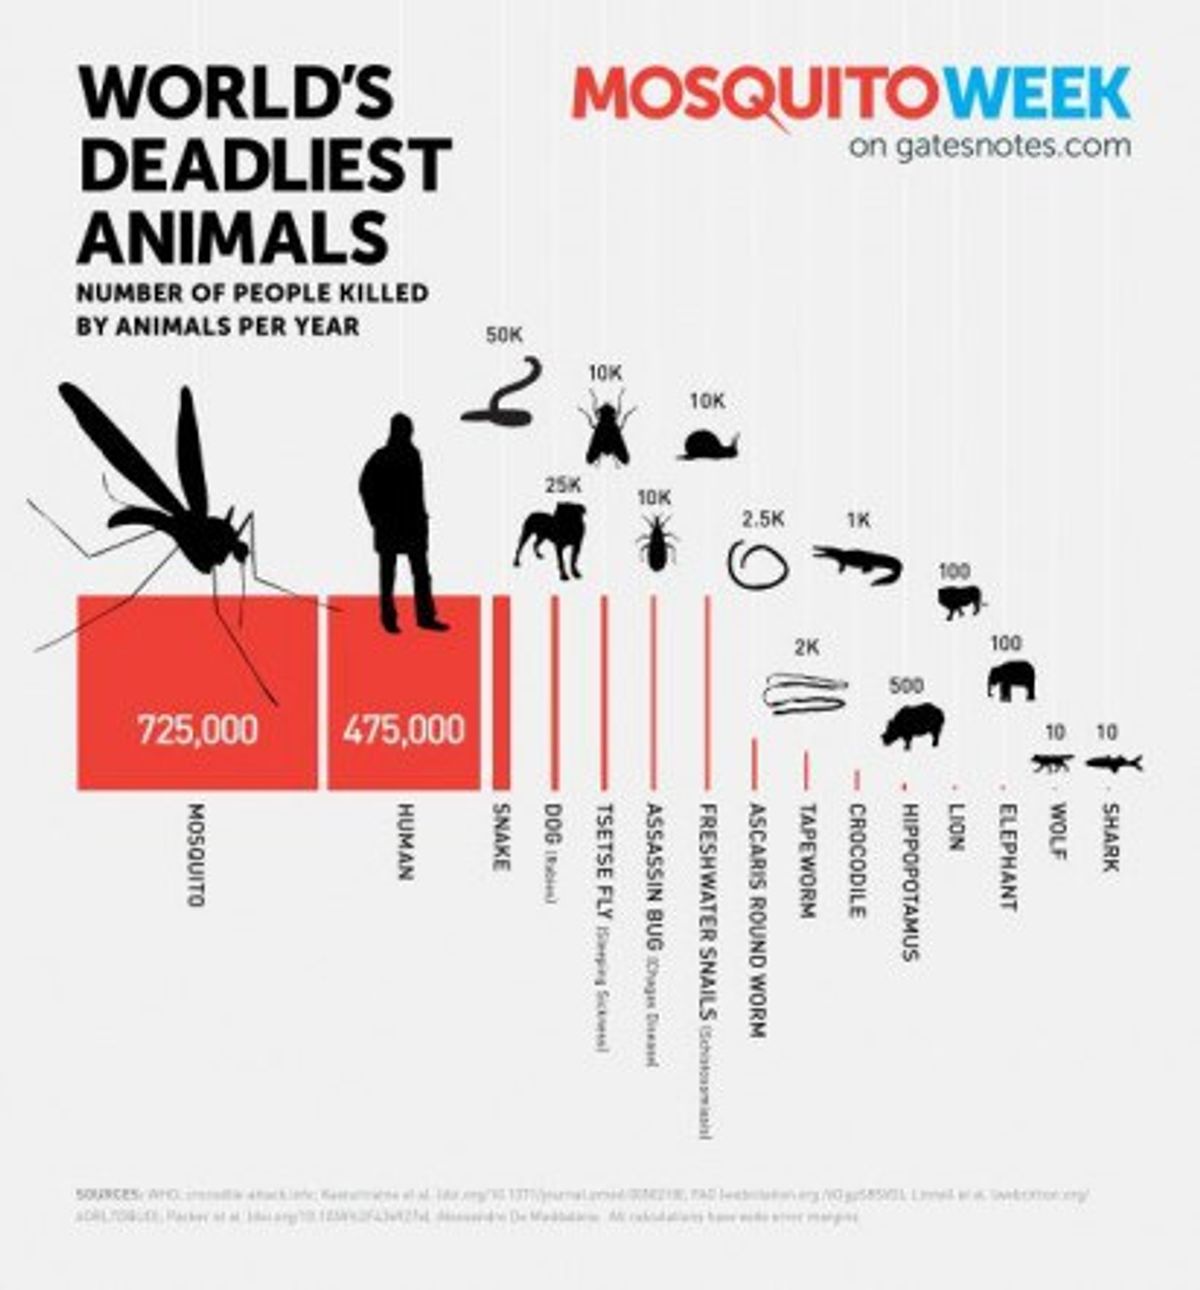 The World’s Deadliest Animal – The Mosquito